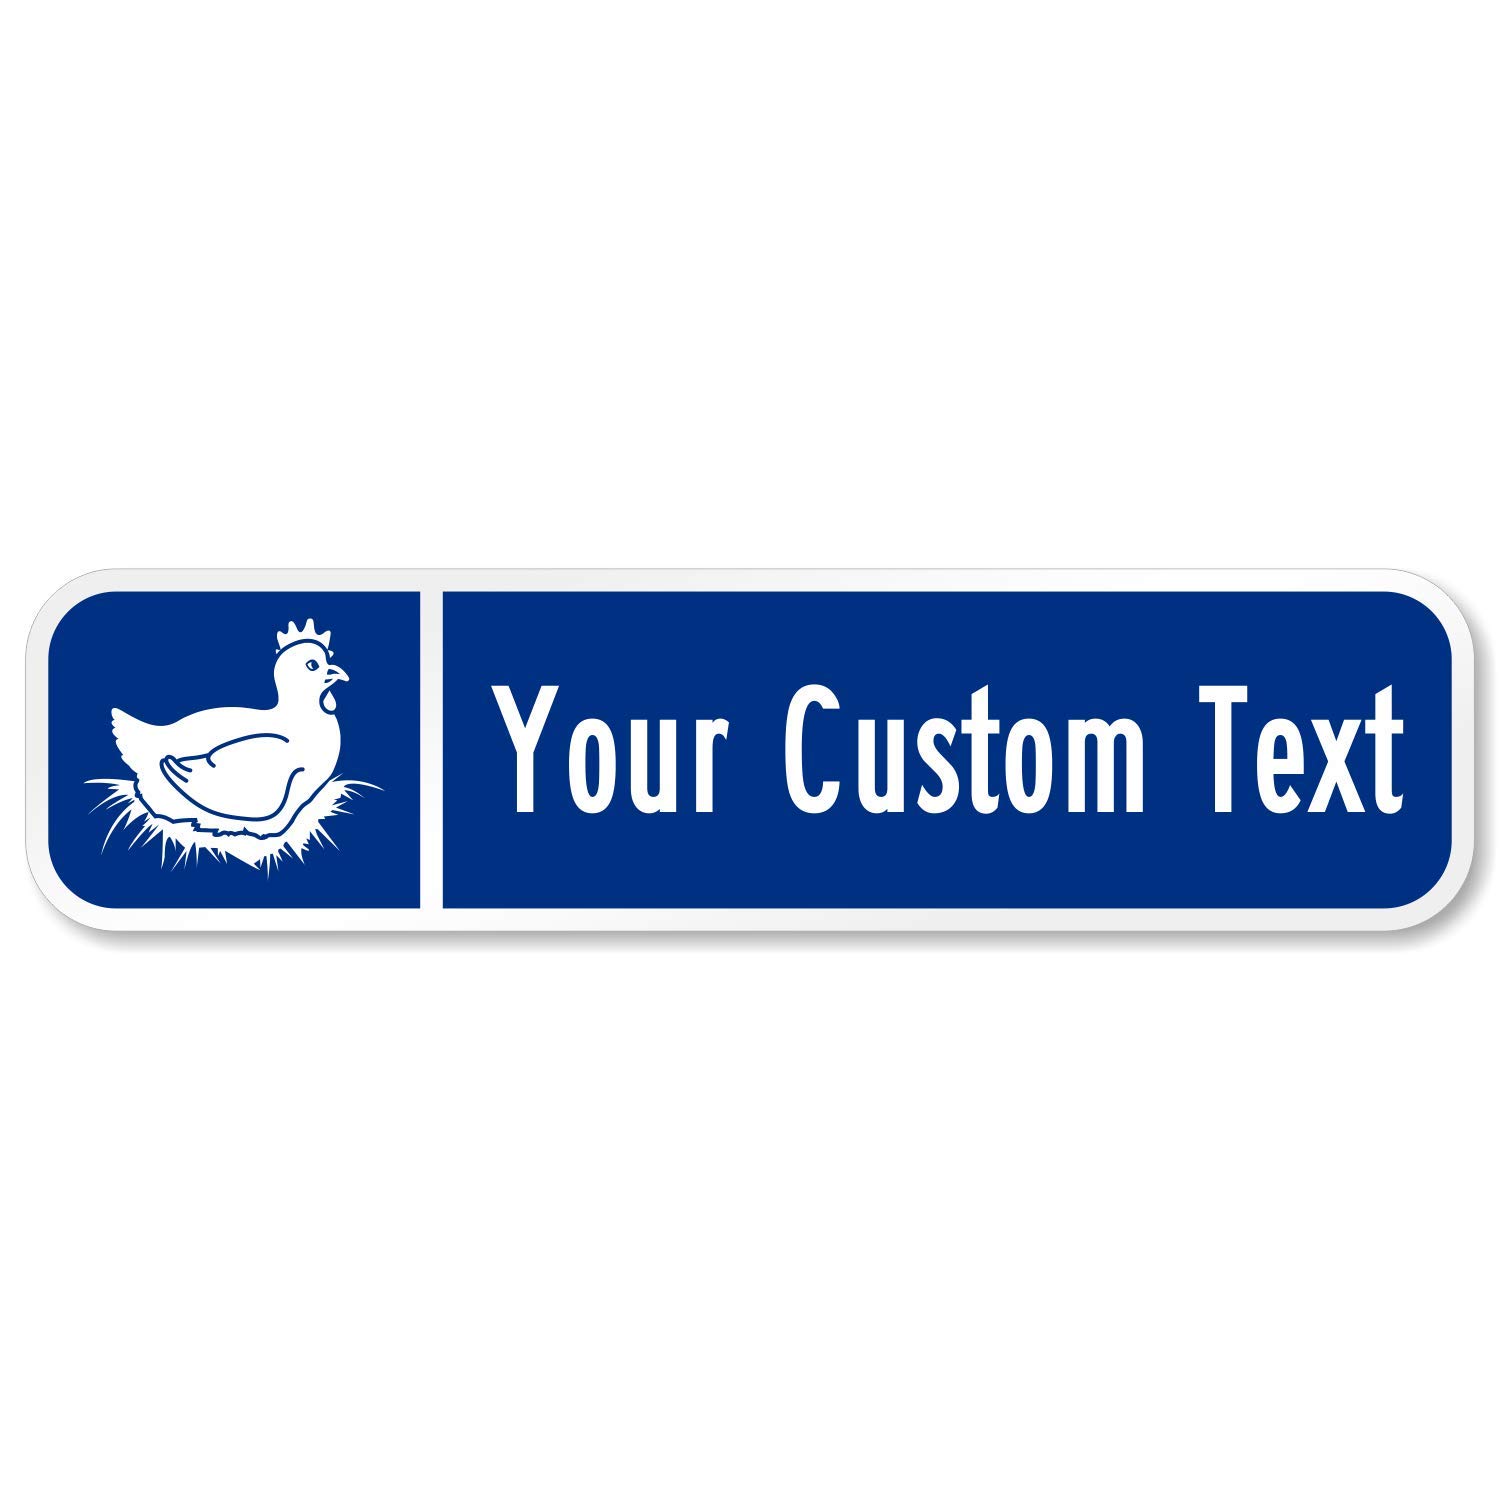 SmartSign customize Your Own Blue Street Sign with Hen Symbol  6 x 24 3M Eg Reflective Aluminum